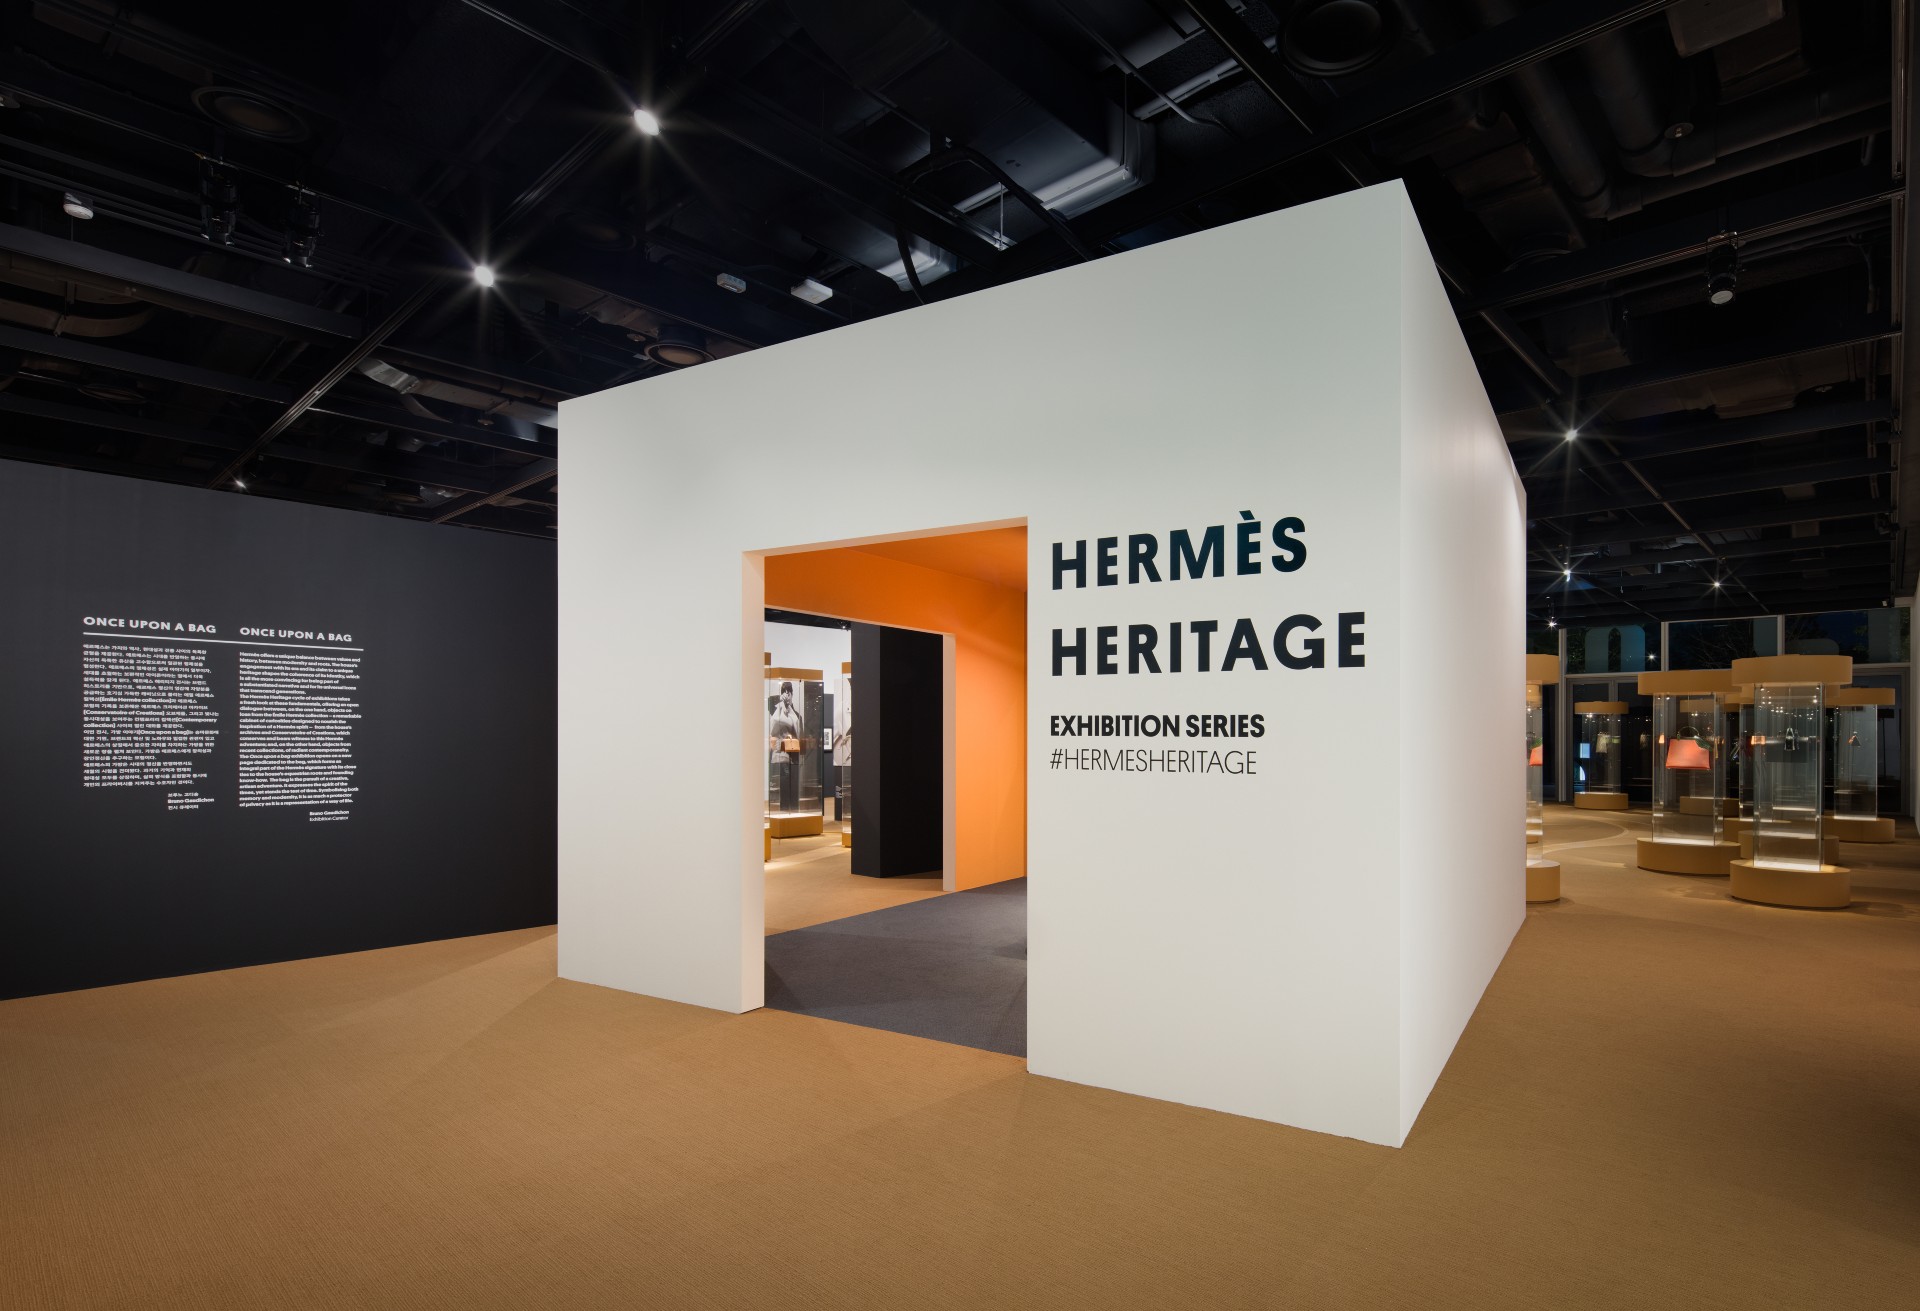 Once Upon A Bag: The Latest Edition of the Hermès Heritage